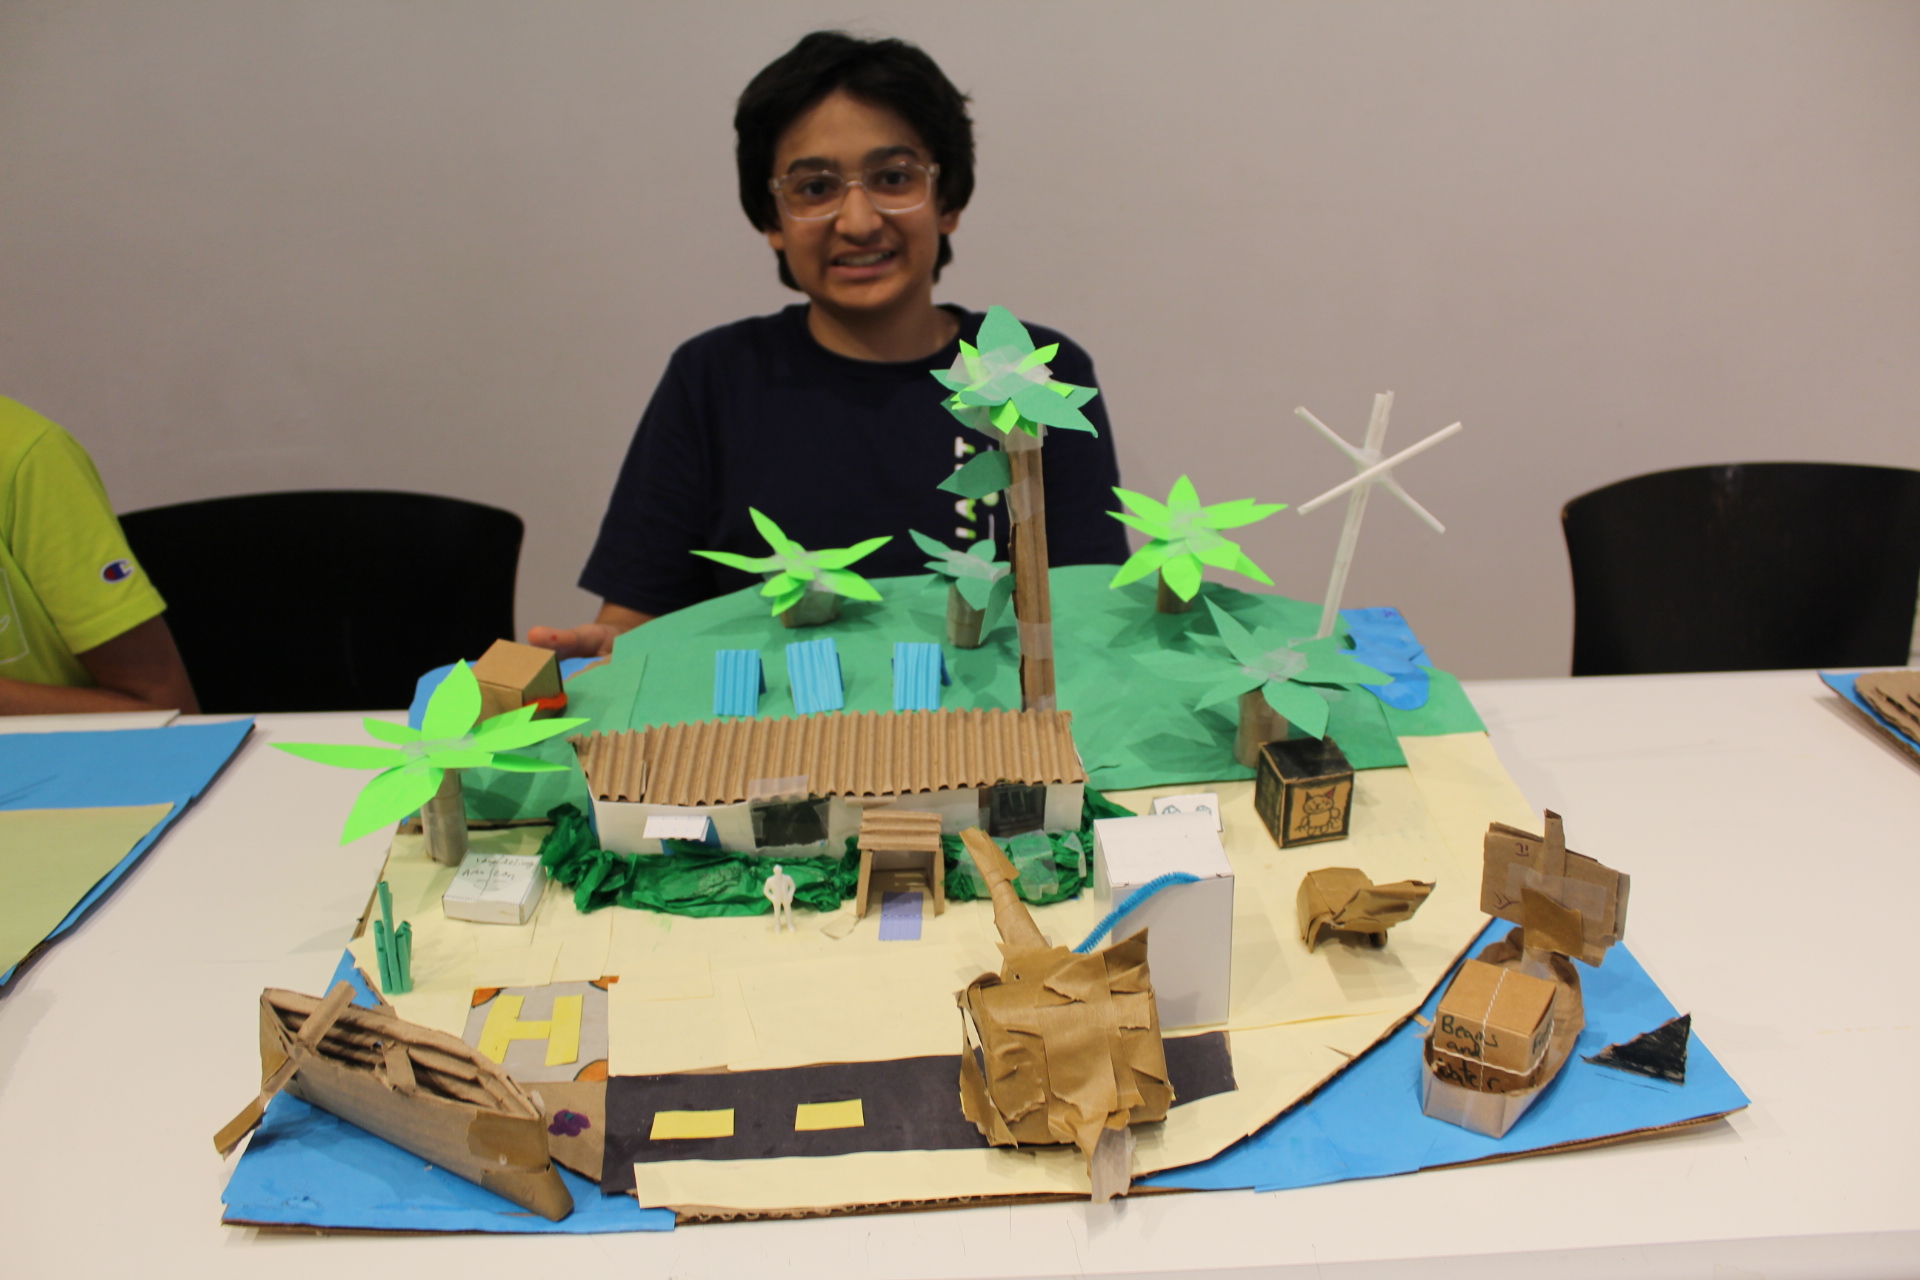 Student with model of island and house